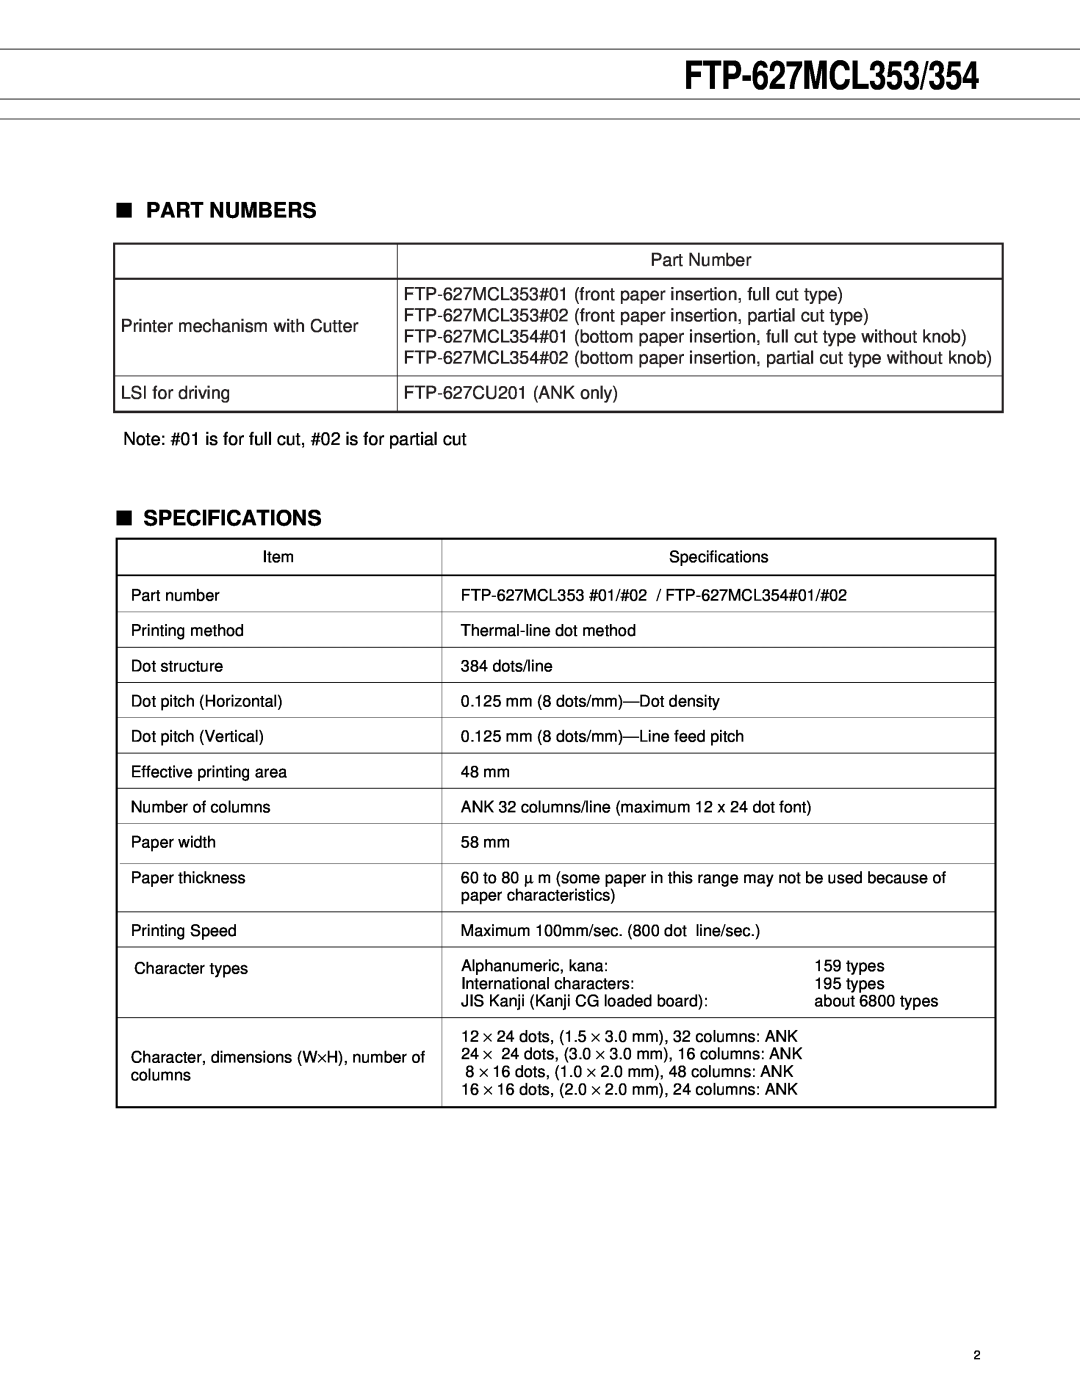 Fujitsu FTP-627MCL354 manual FTP-627MCL353/354, Part Numbers, Specifications 